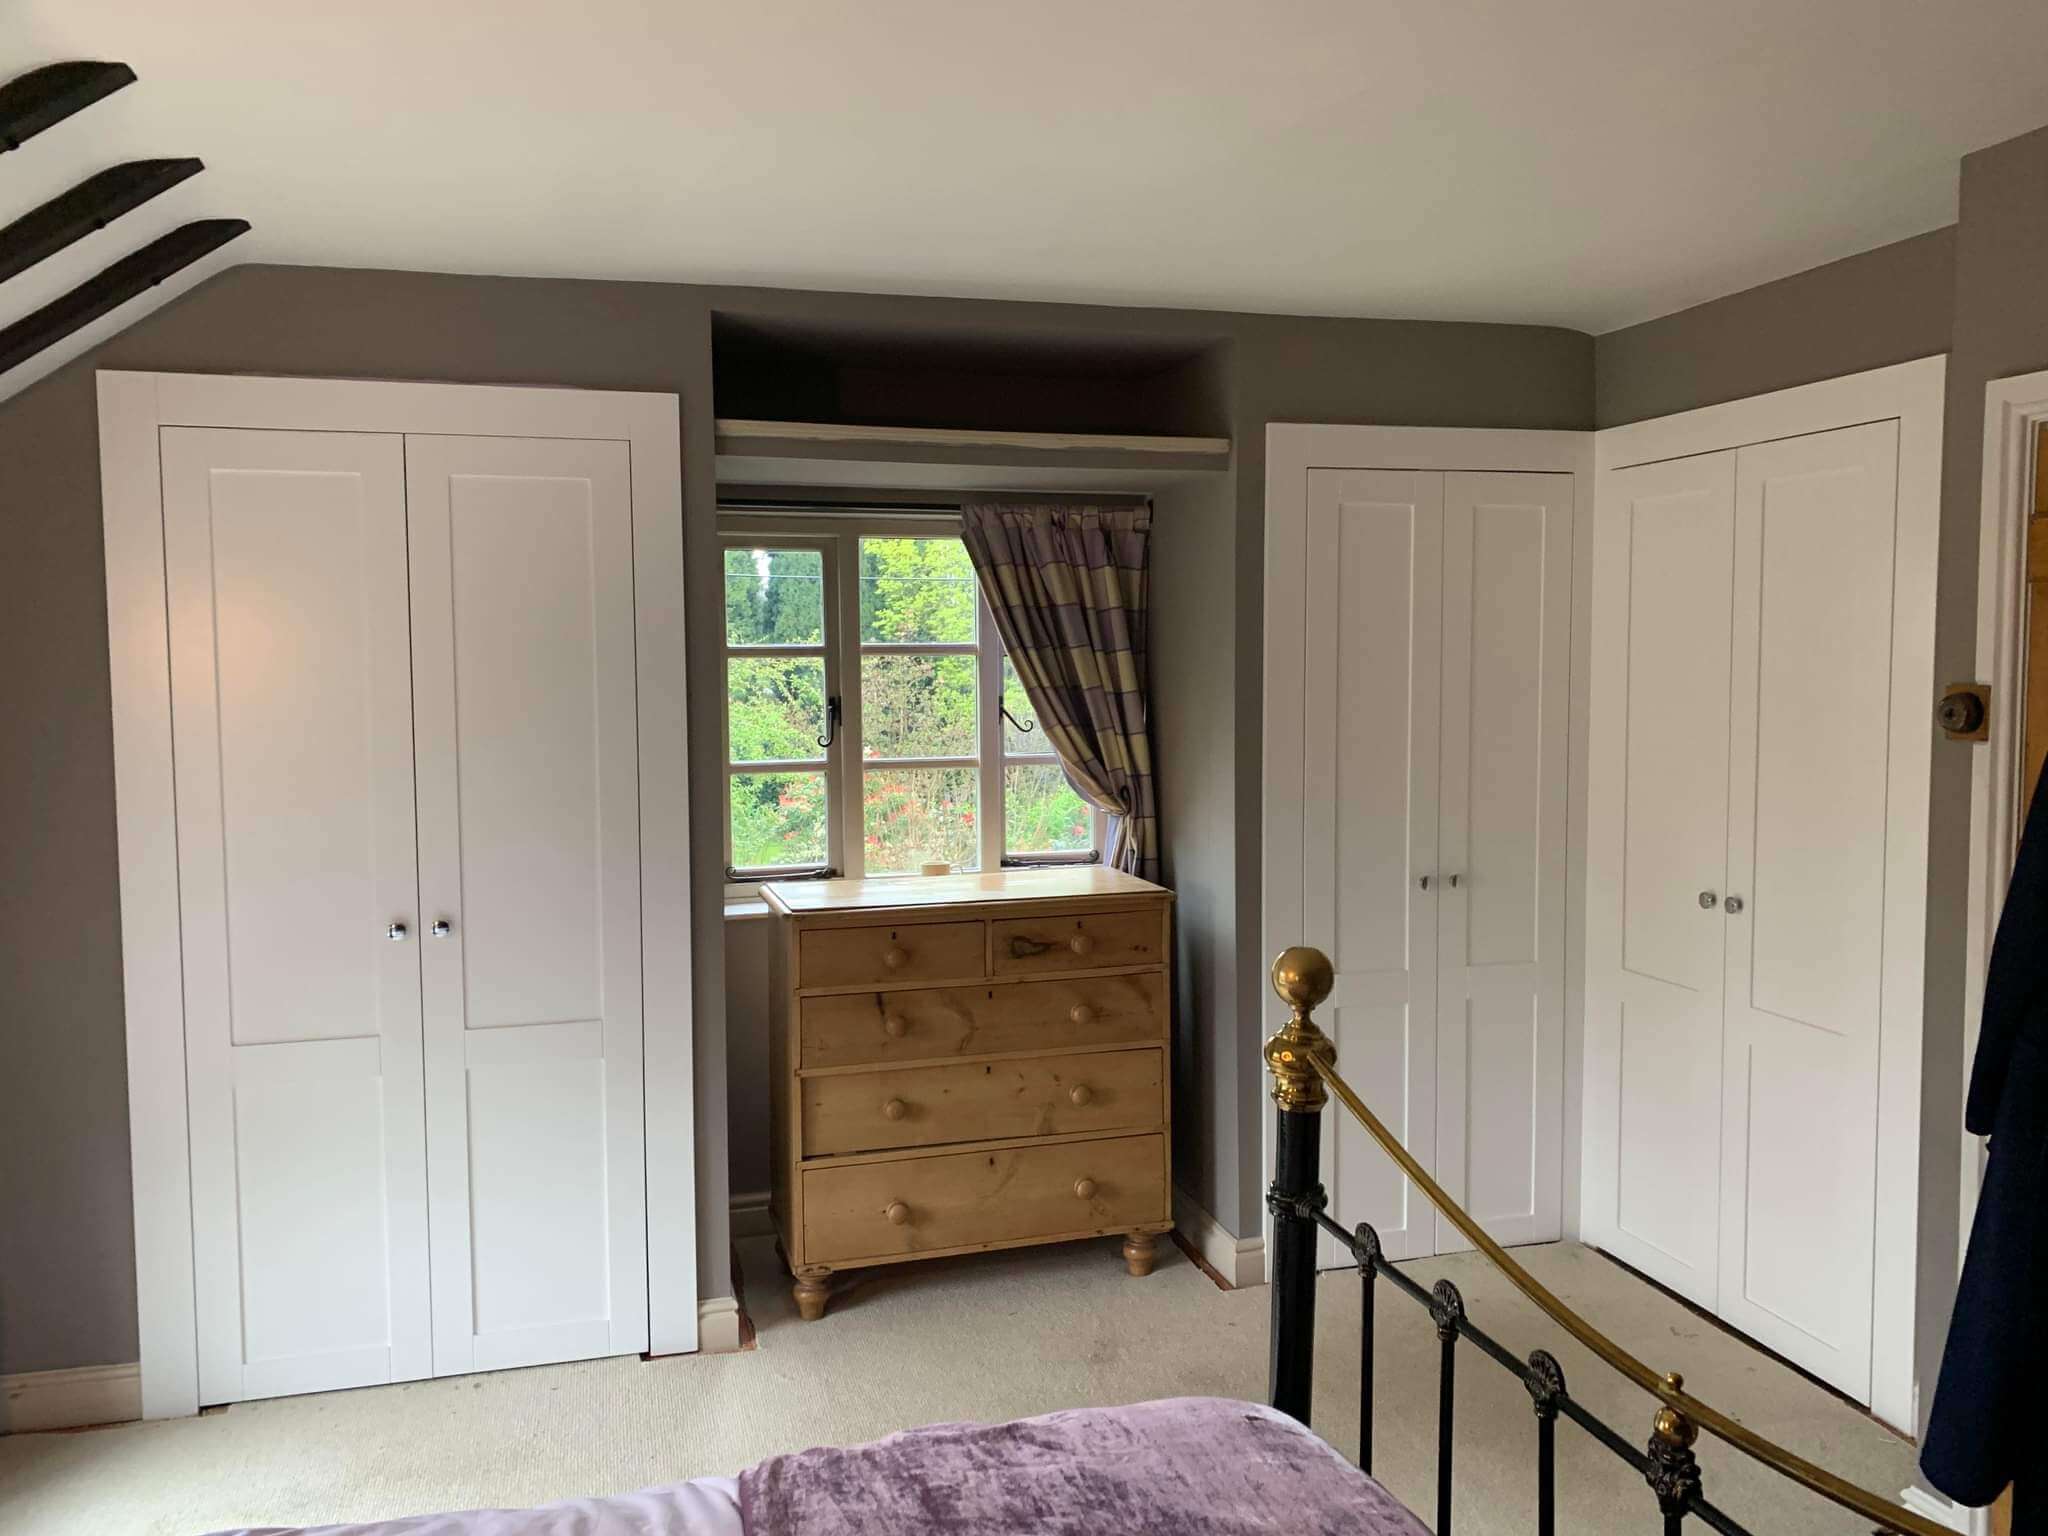 Bedroom Fitted Wardrobes in Shaker Style